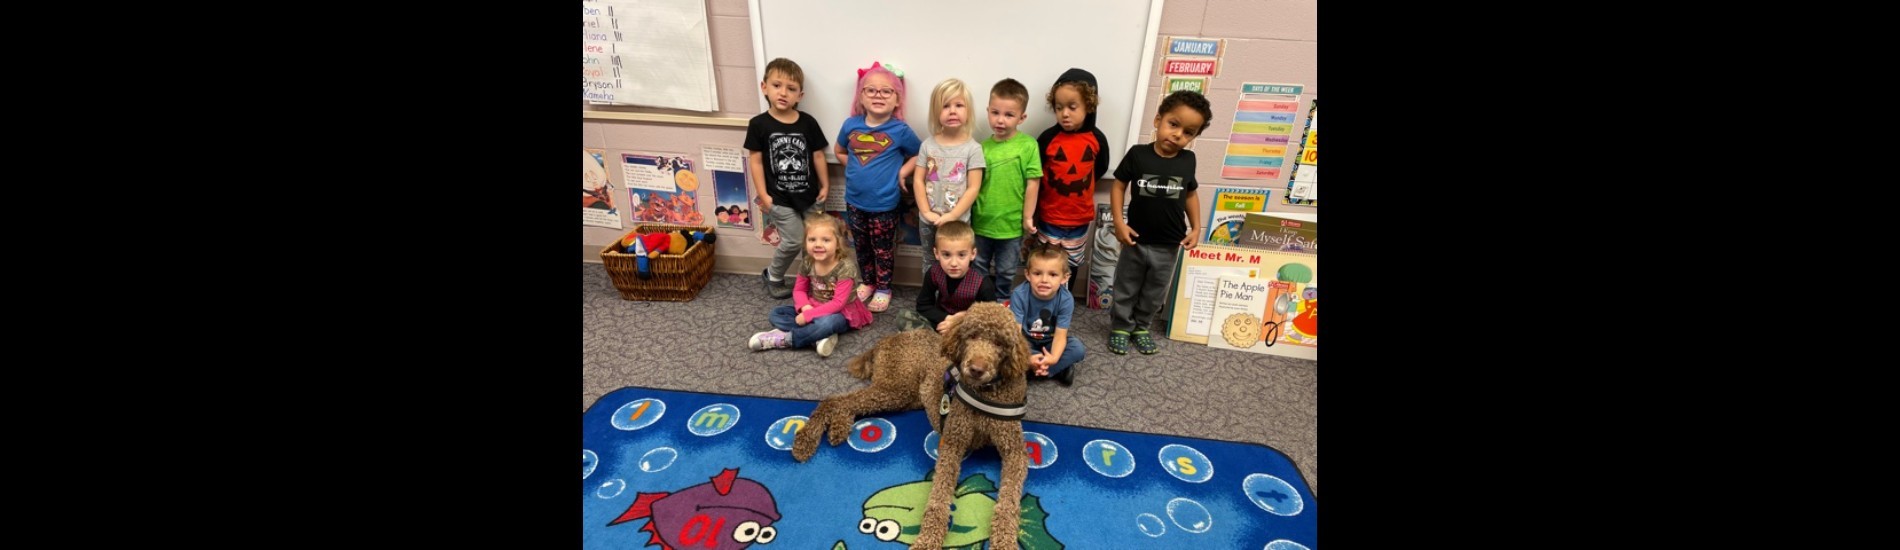 Preschool students strike a pose with the school therapy dog.